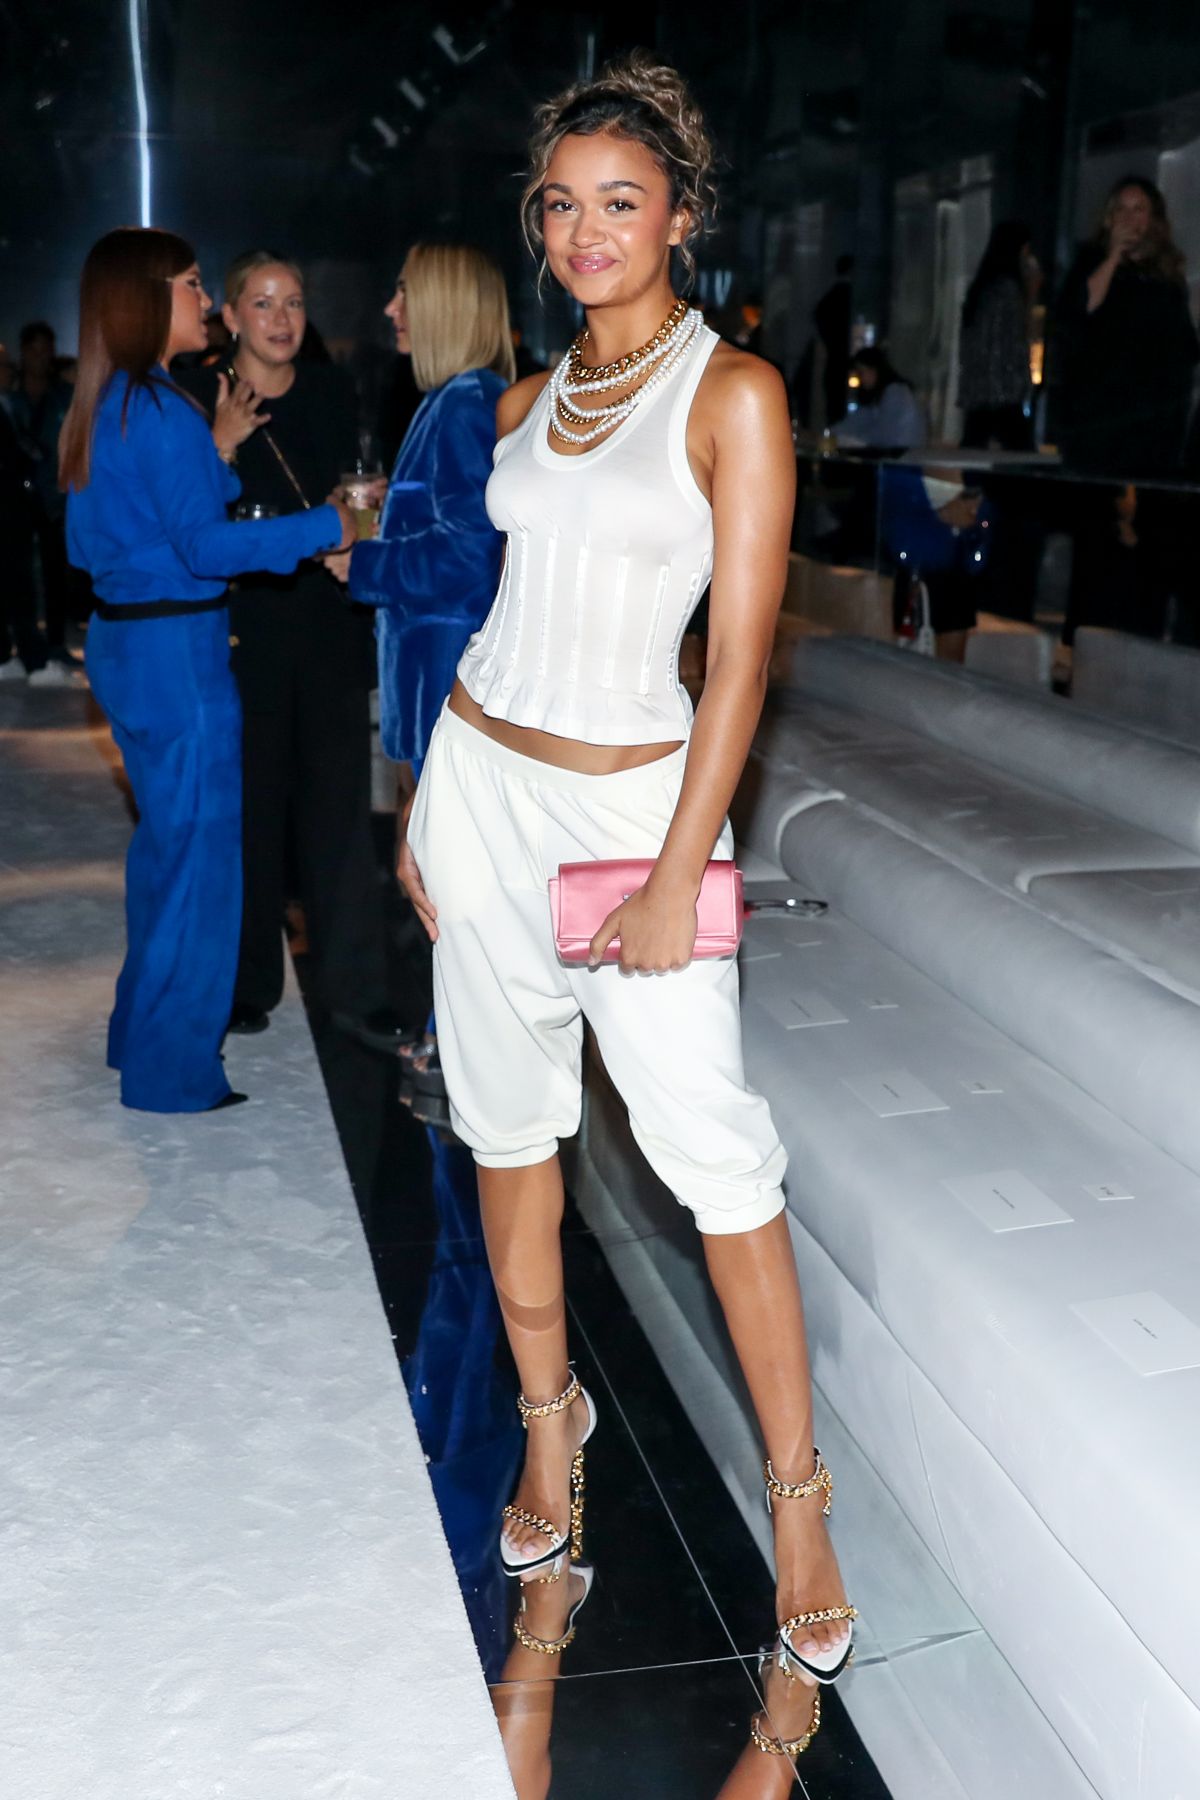 Madison Bailey seen in Beautiful Outfit at Tom Ford SS23 Runway Show in New York, Sep 2022